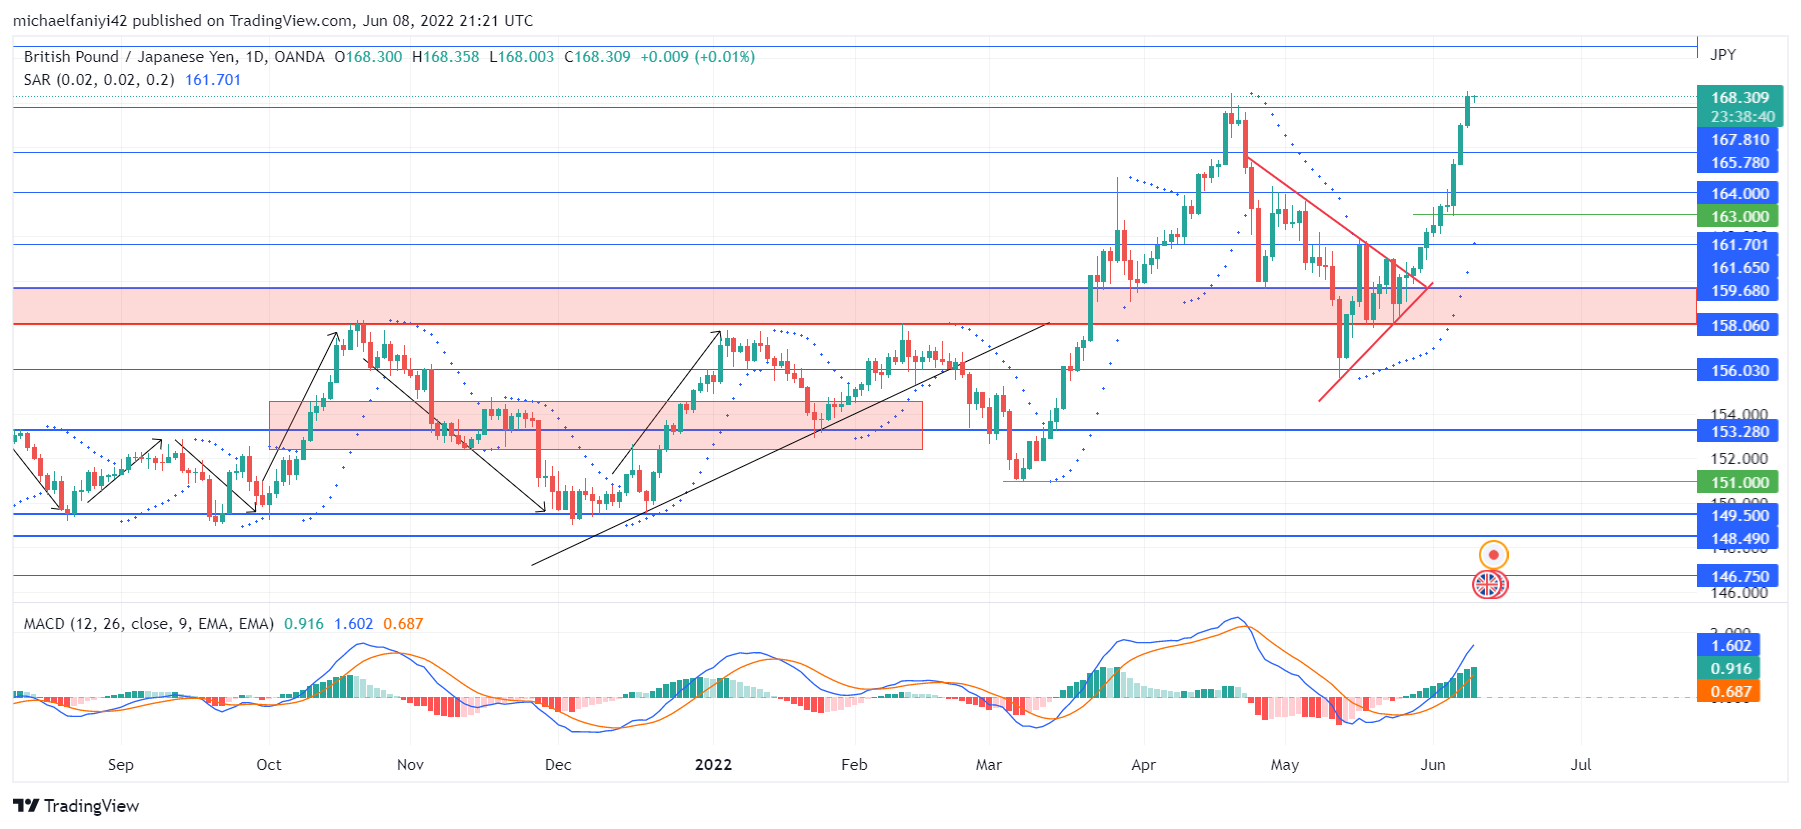 GBPJPY Is Set to Surpass Its Year High 